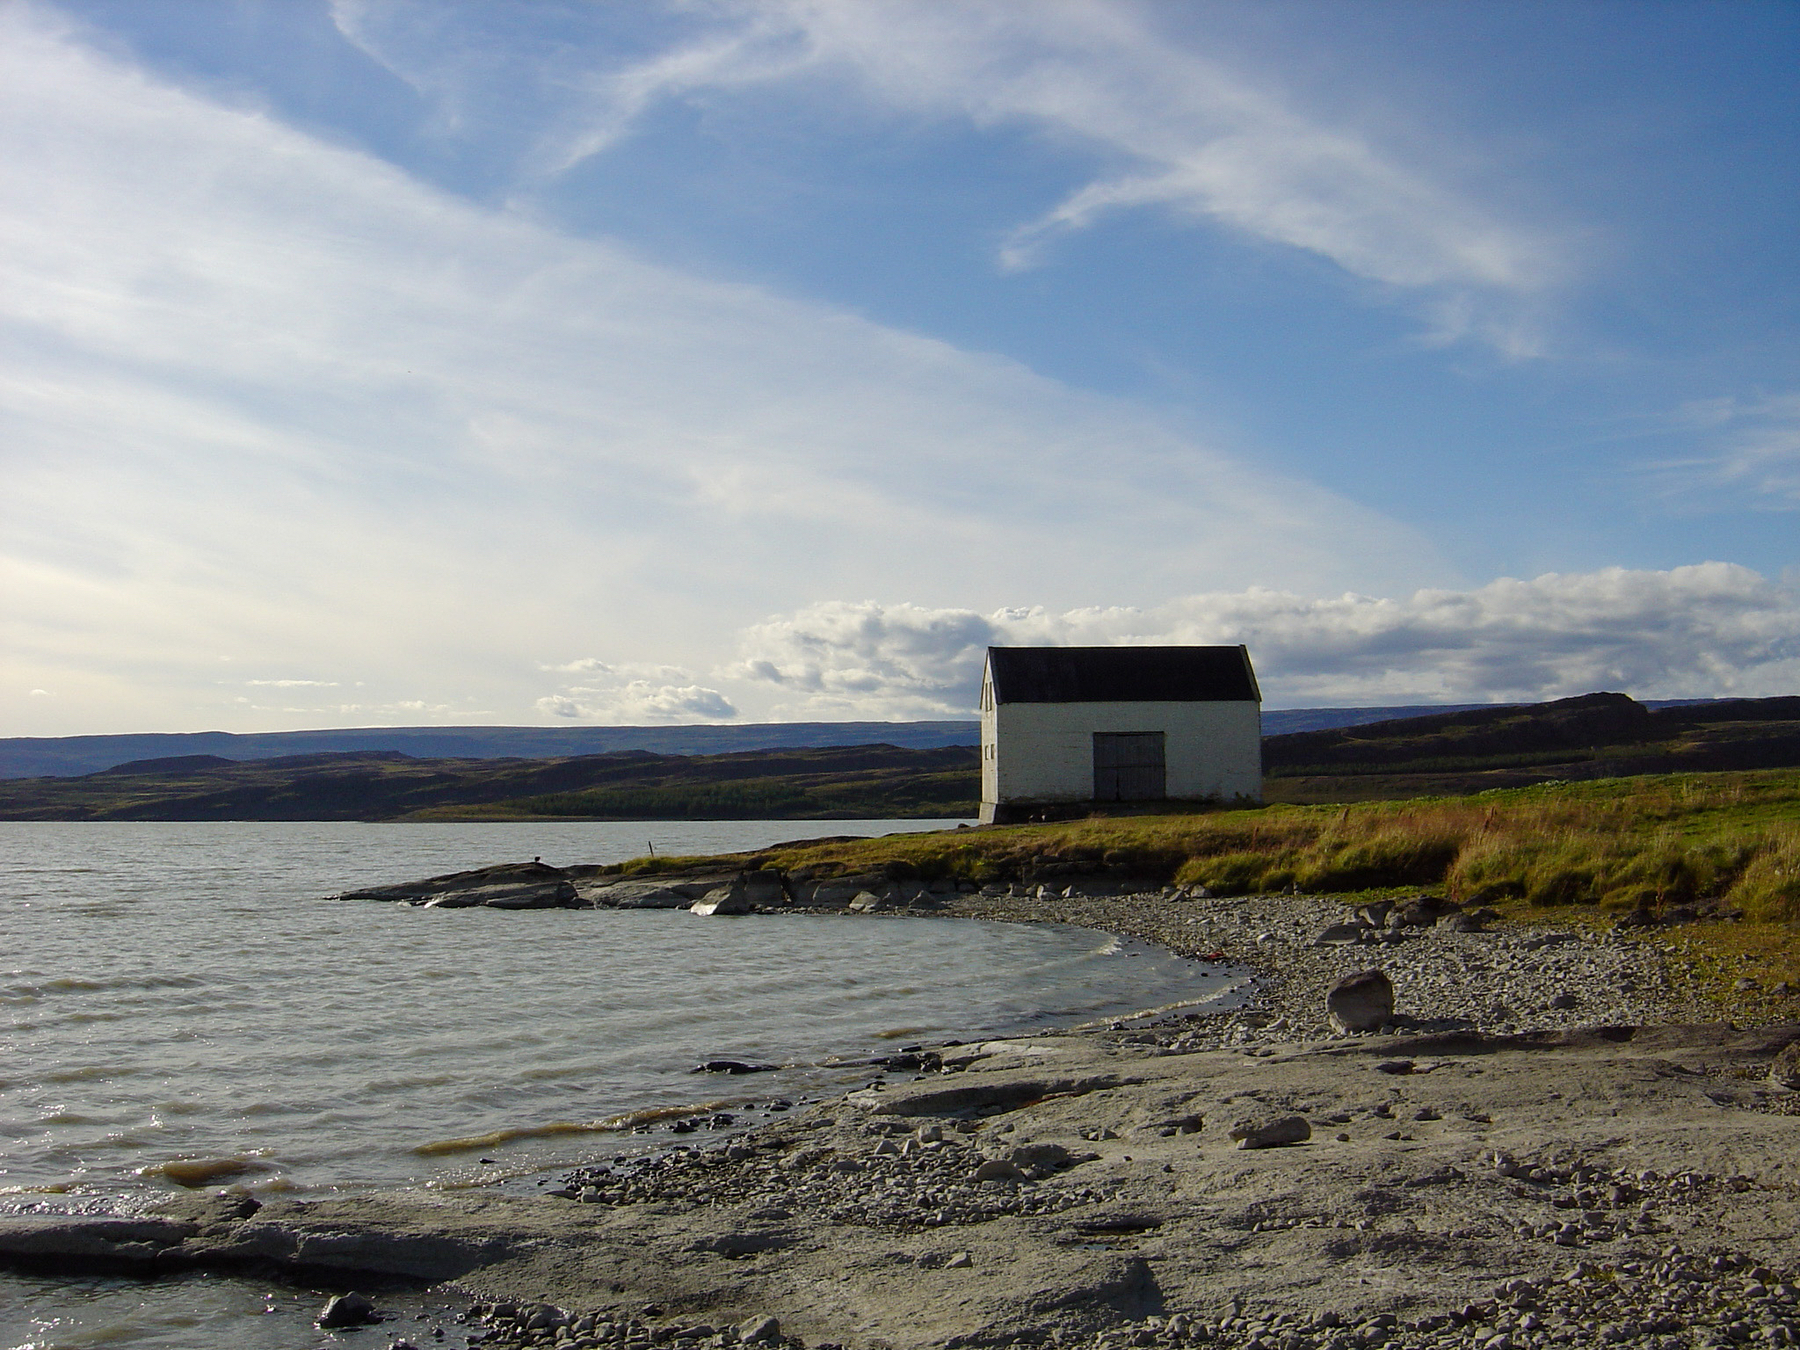 Another by the lake near Egilsstaðir. A house or shed is near the centre of the image.